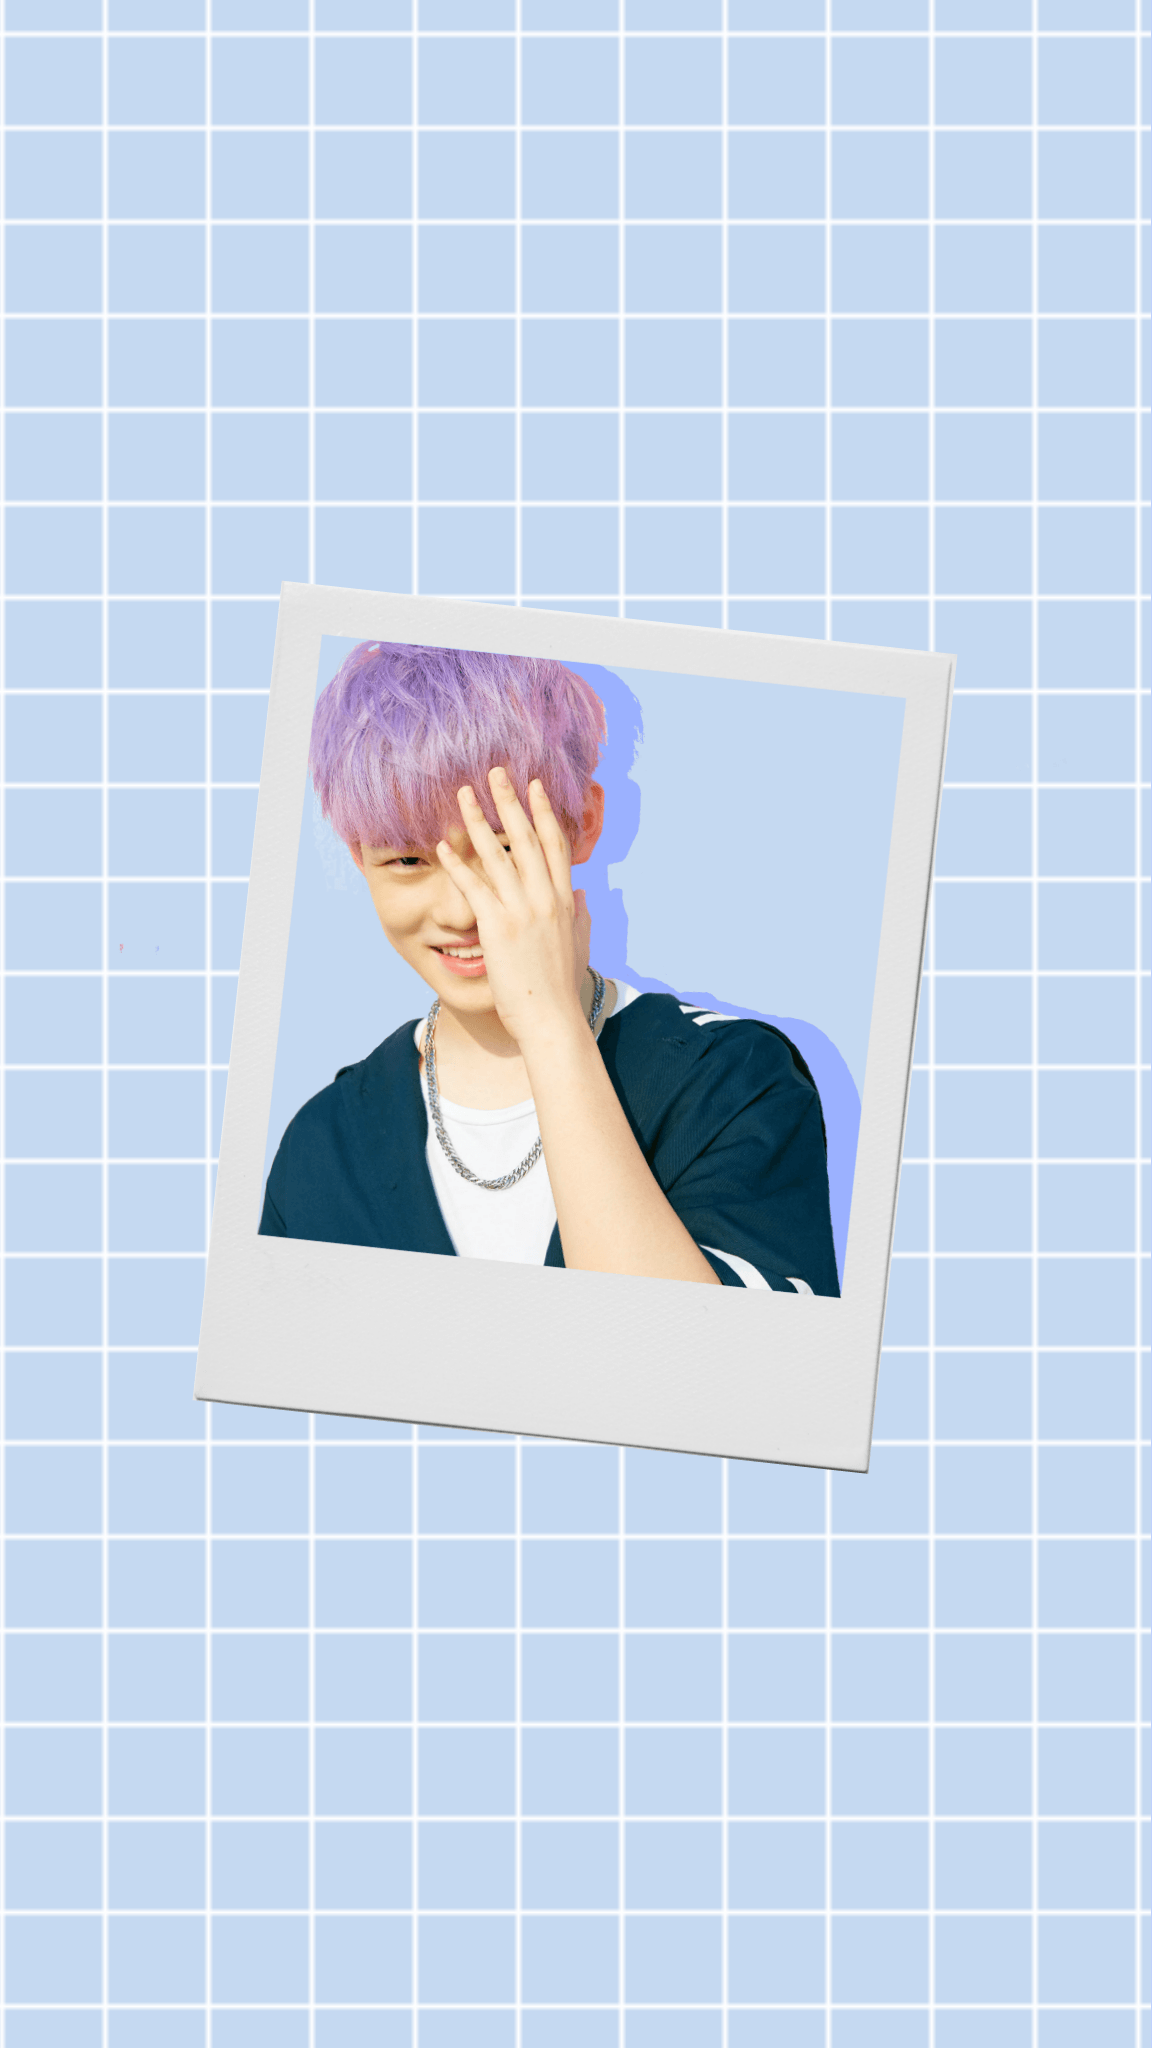 nct dream chenle polaroid wallpaper we young